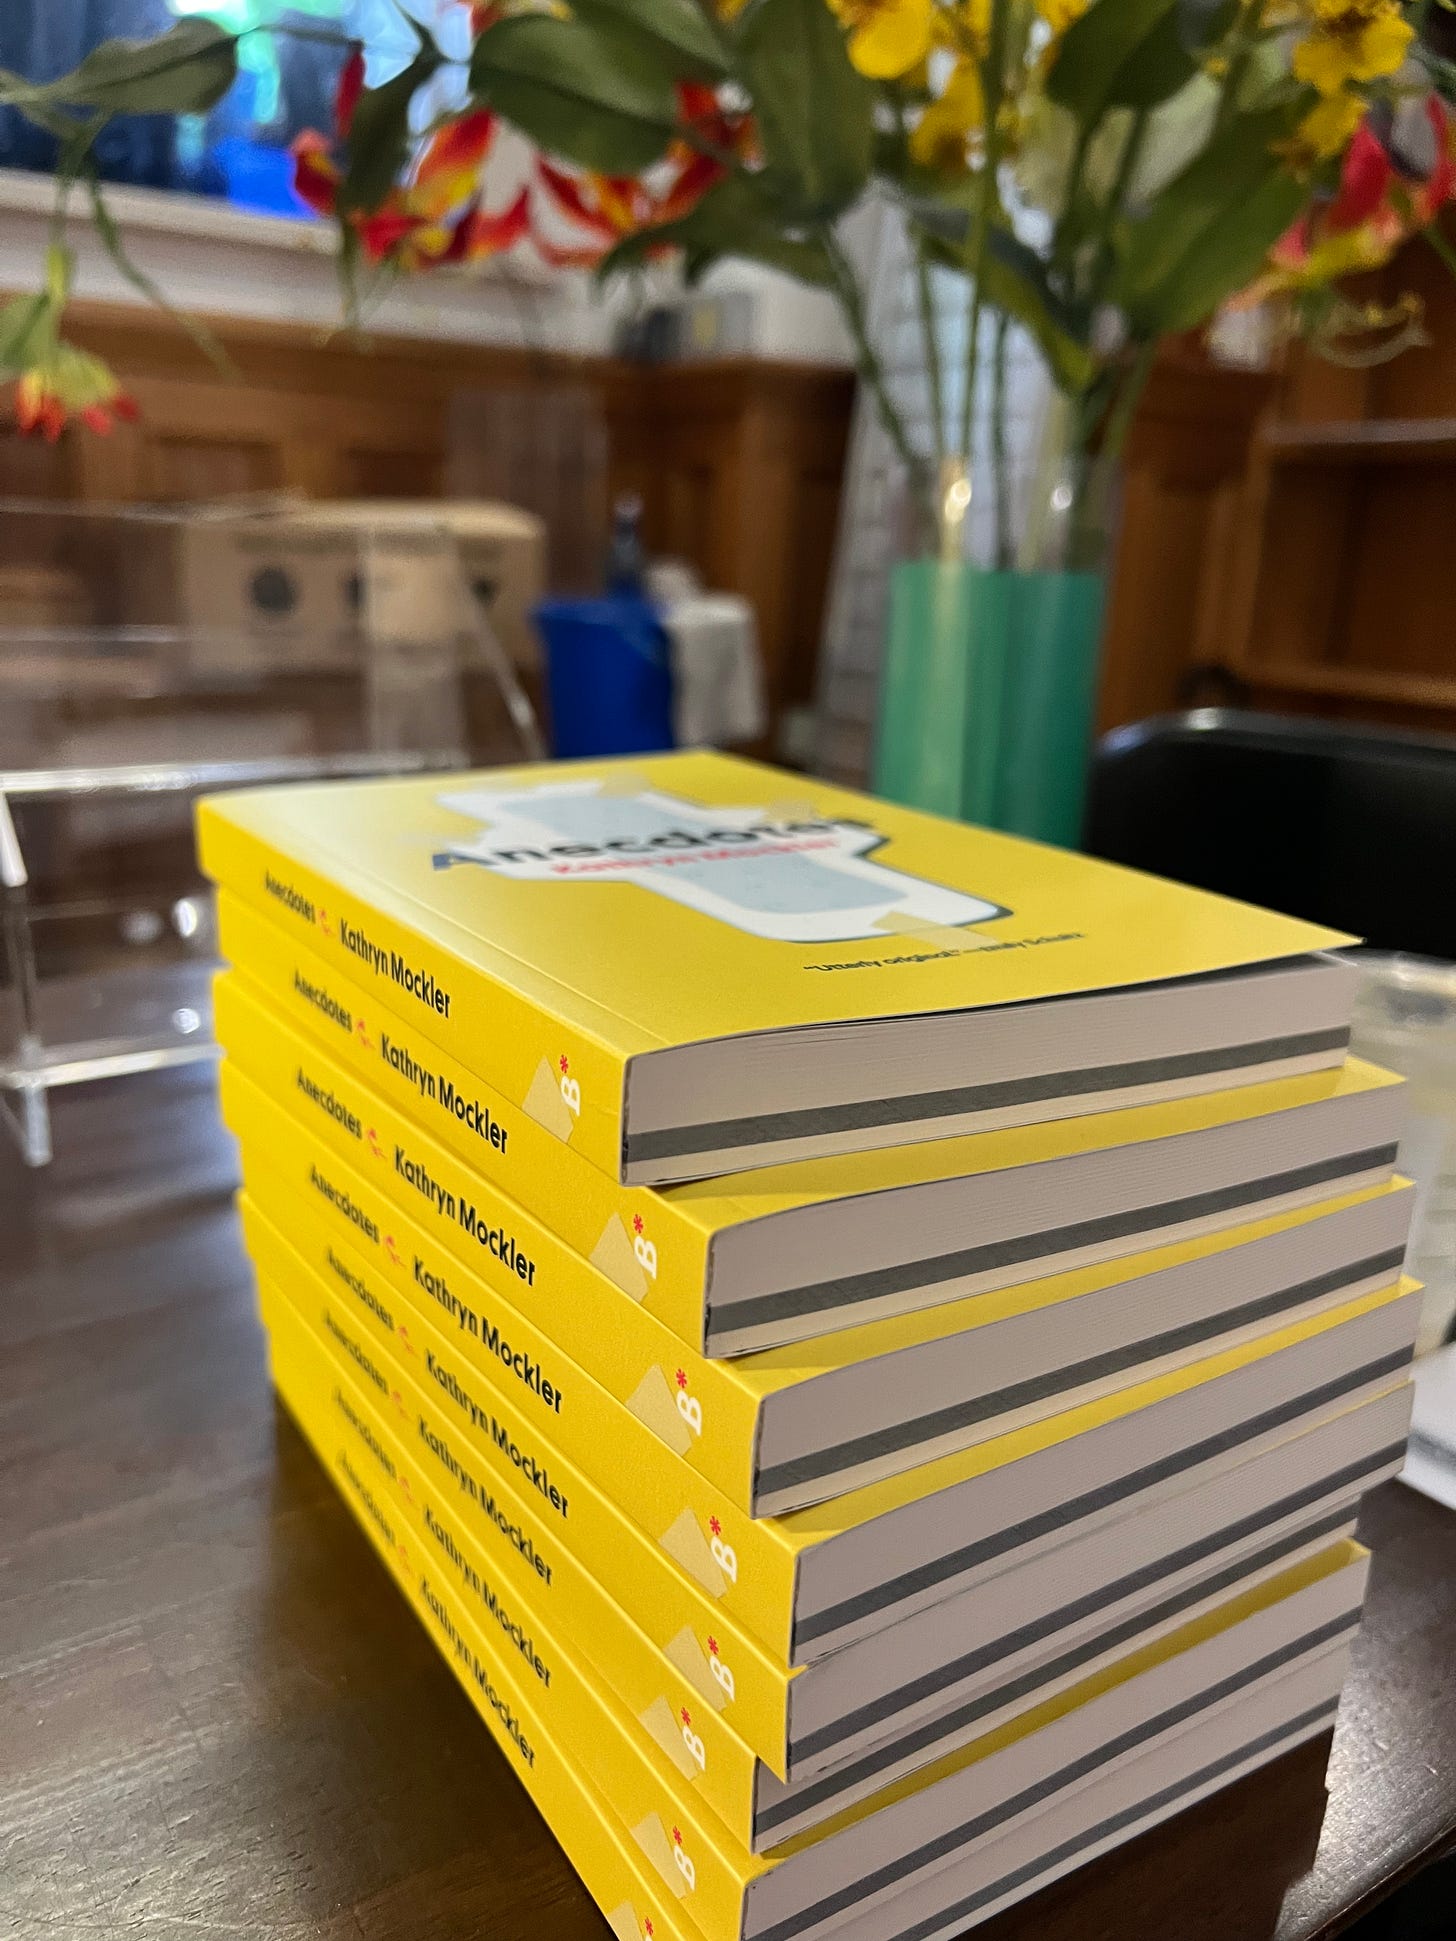 A stack of yellow books with a maxi pad on the cover: Anecdotes by Kathryn Mockler. The books sit beside a bouquet of flowers.